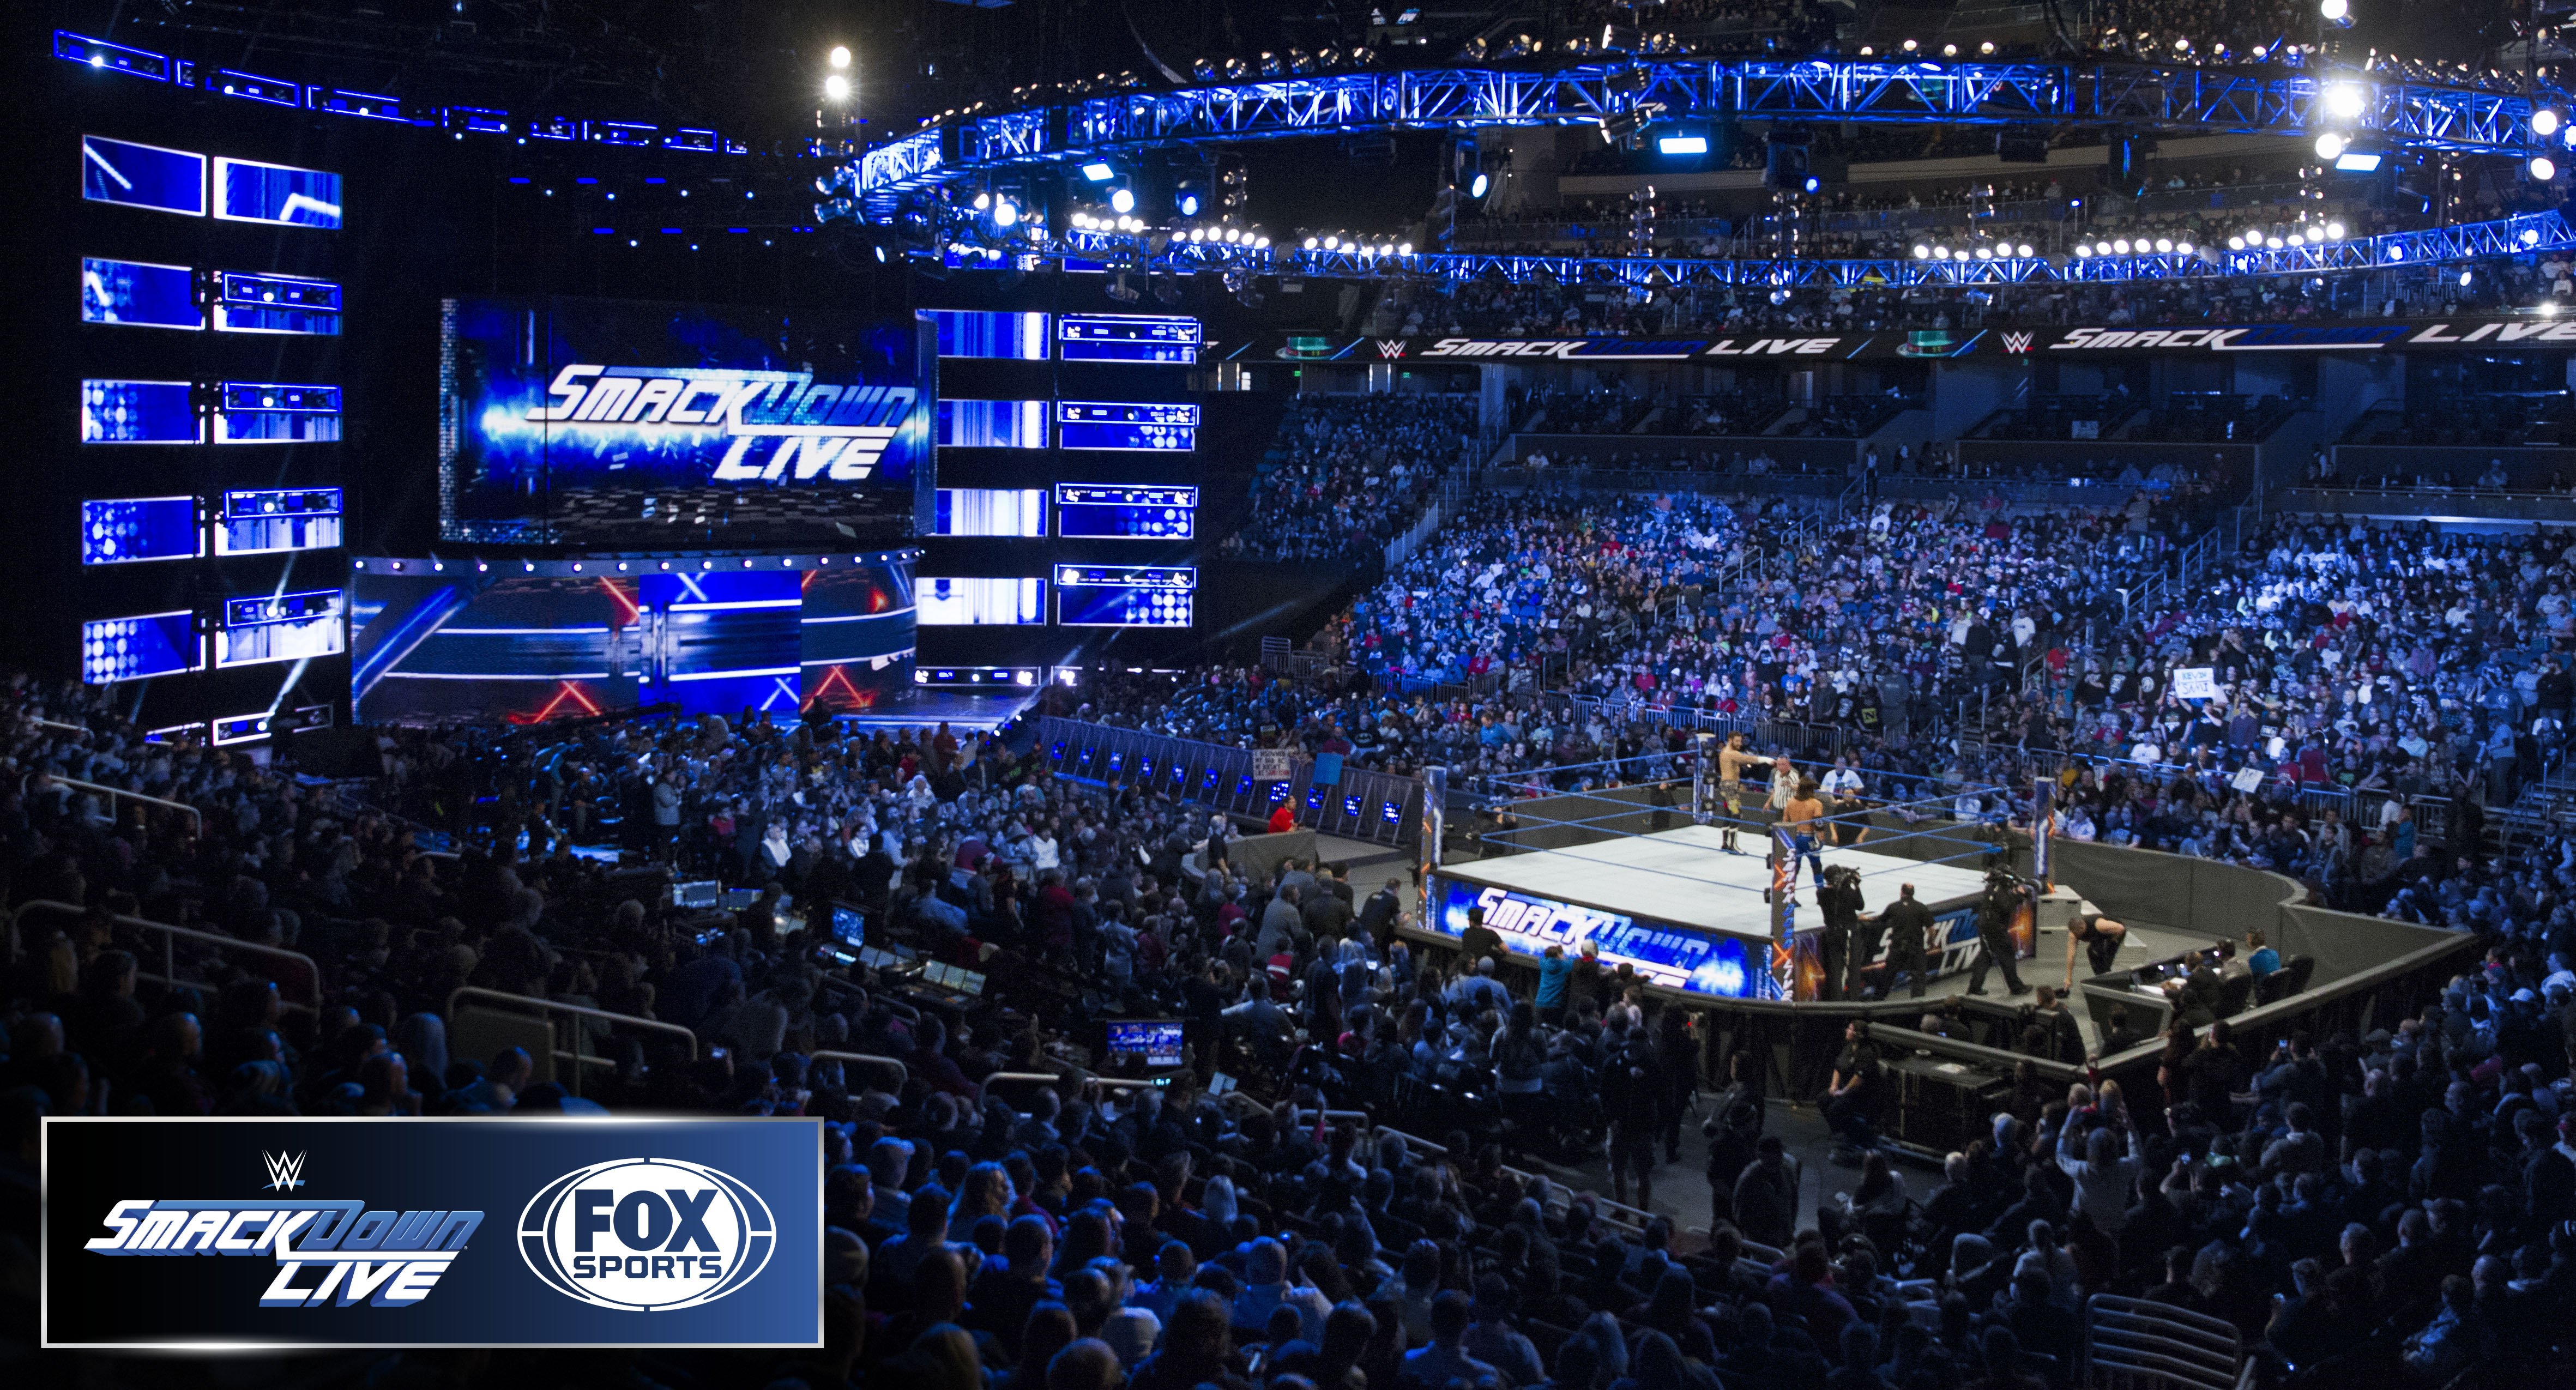 FOX Network Reportedly Wants SmackDown Live To Be More Sports-Oriented